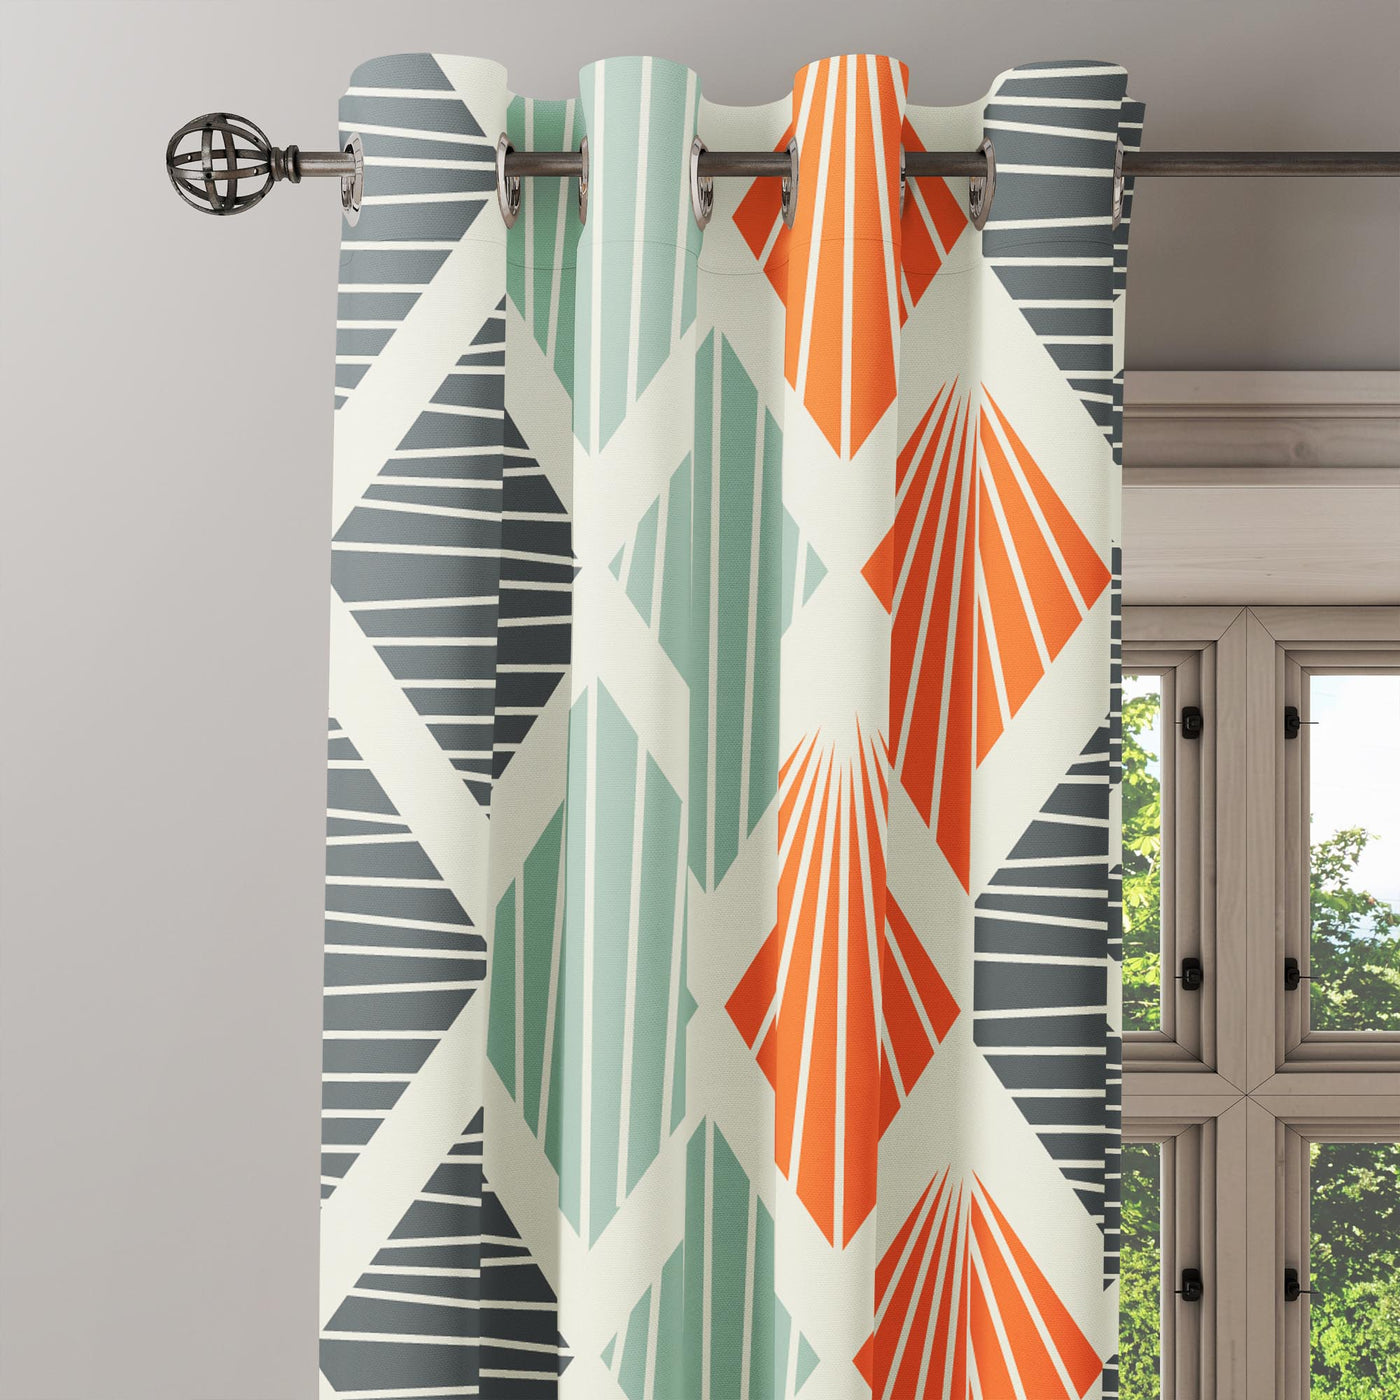 Coral Abstract Pattern Curtain